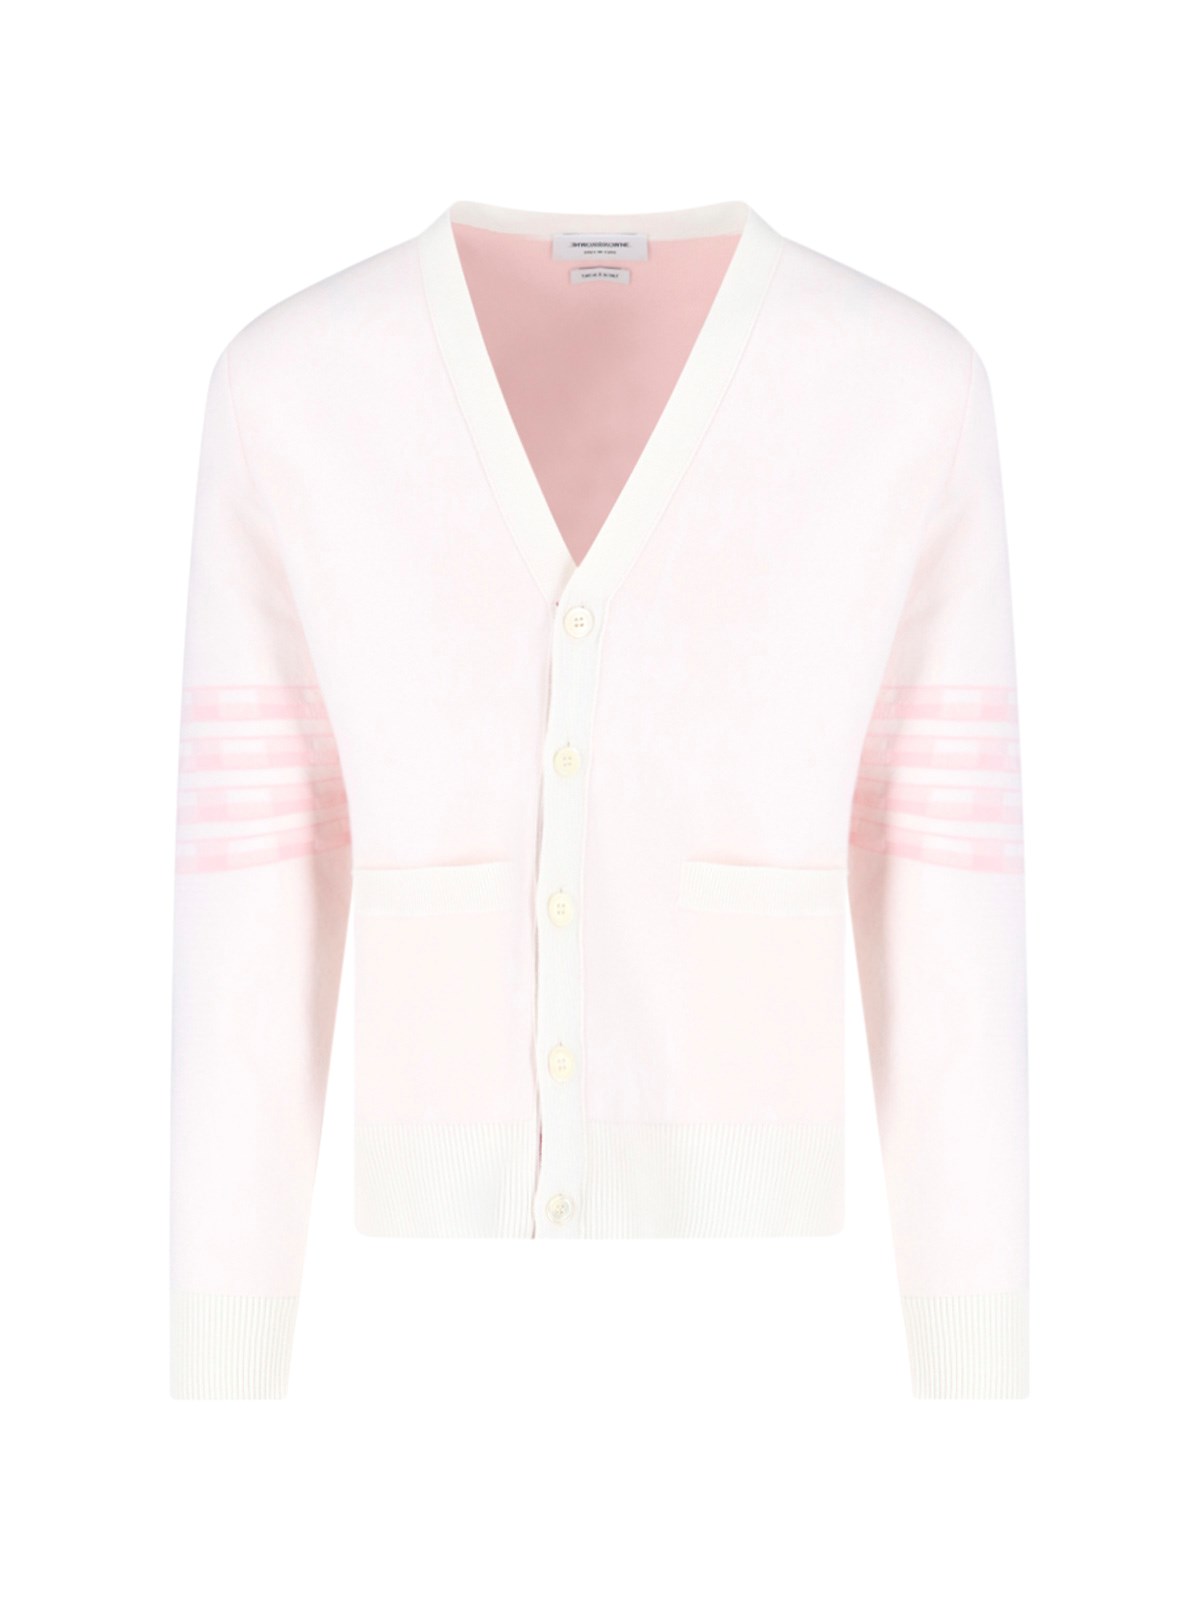 Thom Browne Hector Jacquard Cotton 4-bar V-neck Cardigan In White